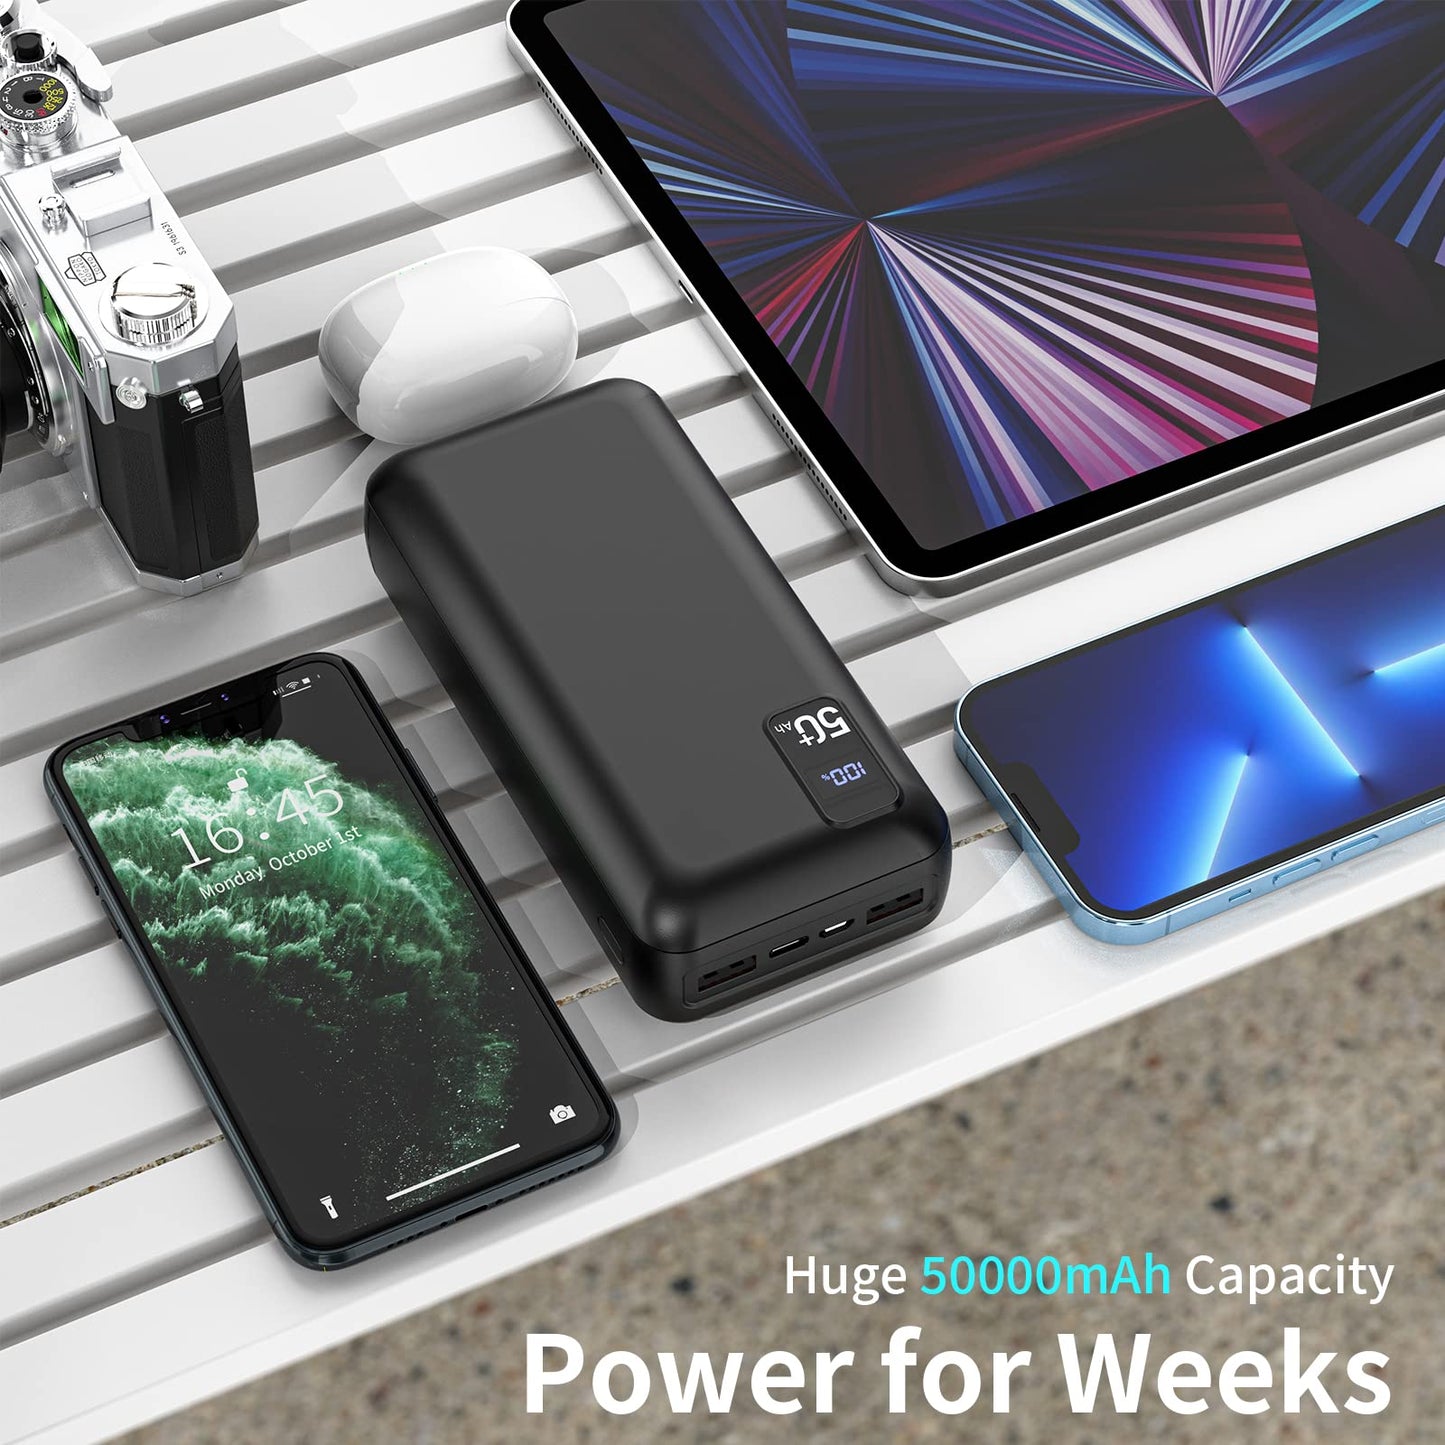 POIYTL Power Bank 50000mAh 22.5W Fast Charging Portable Charger USB-C Quick Charge with 3 Outputs & 2 Inputs LED Display Huge Capacity External Battery Pack for Most Electronic Devices on The Market